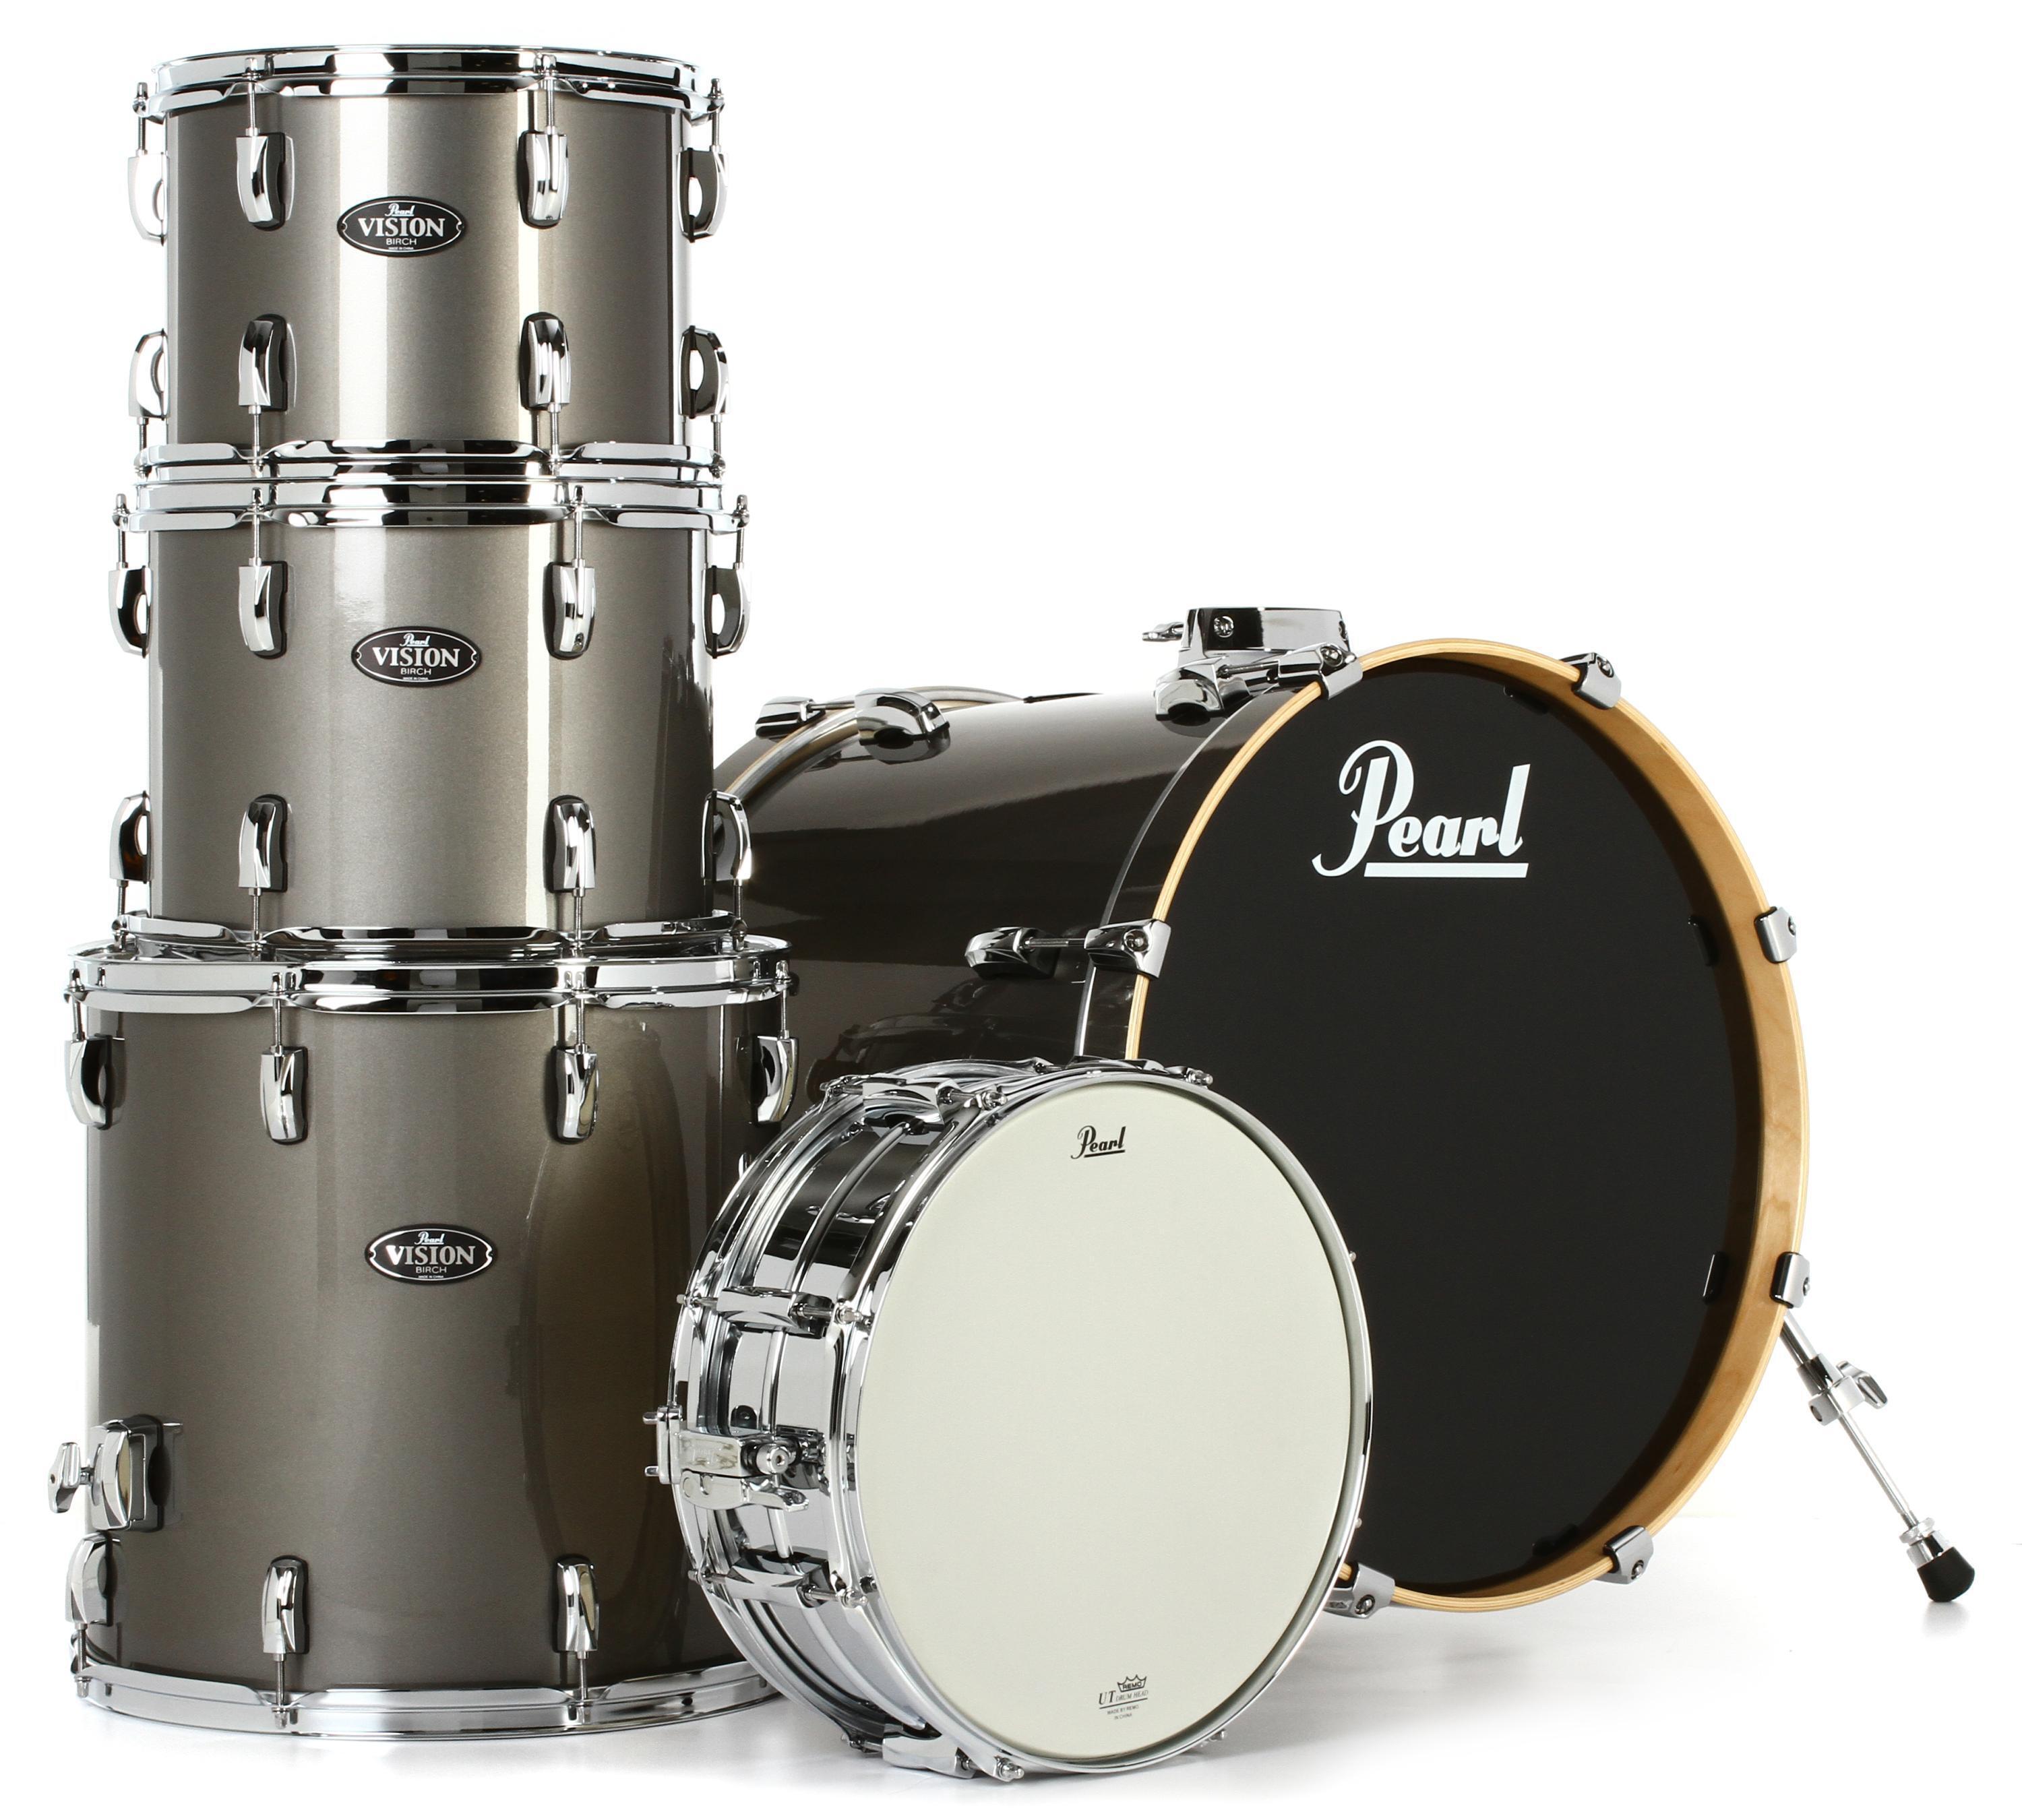 Pearl Drums India